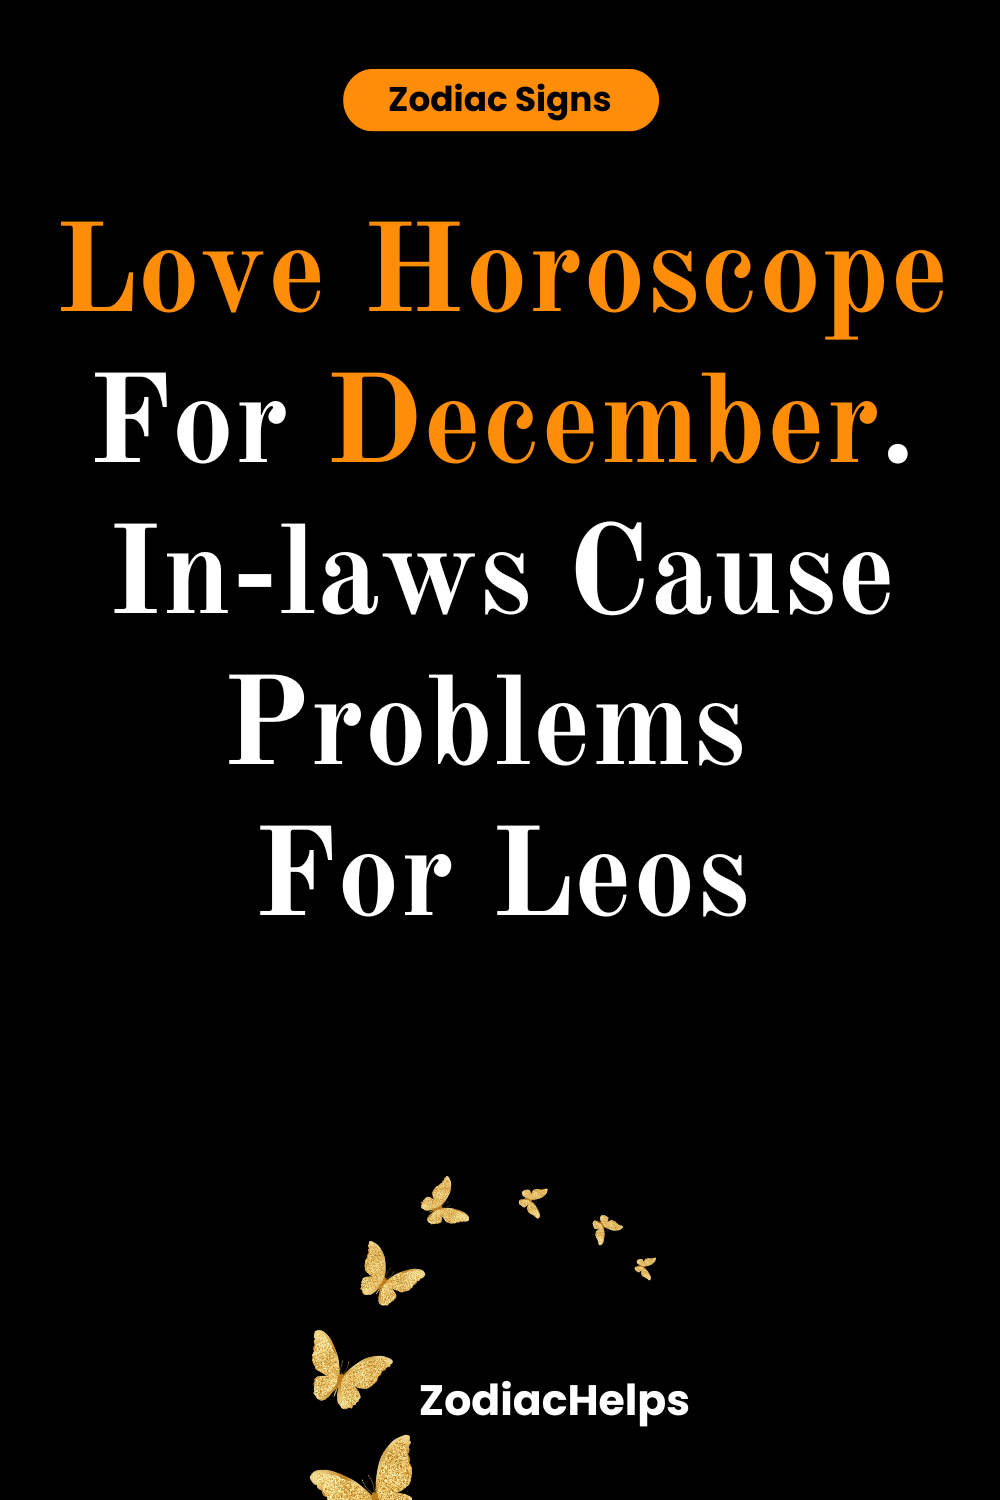 Love Horoscope For December. In-laws Cause Problems For Leos